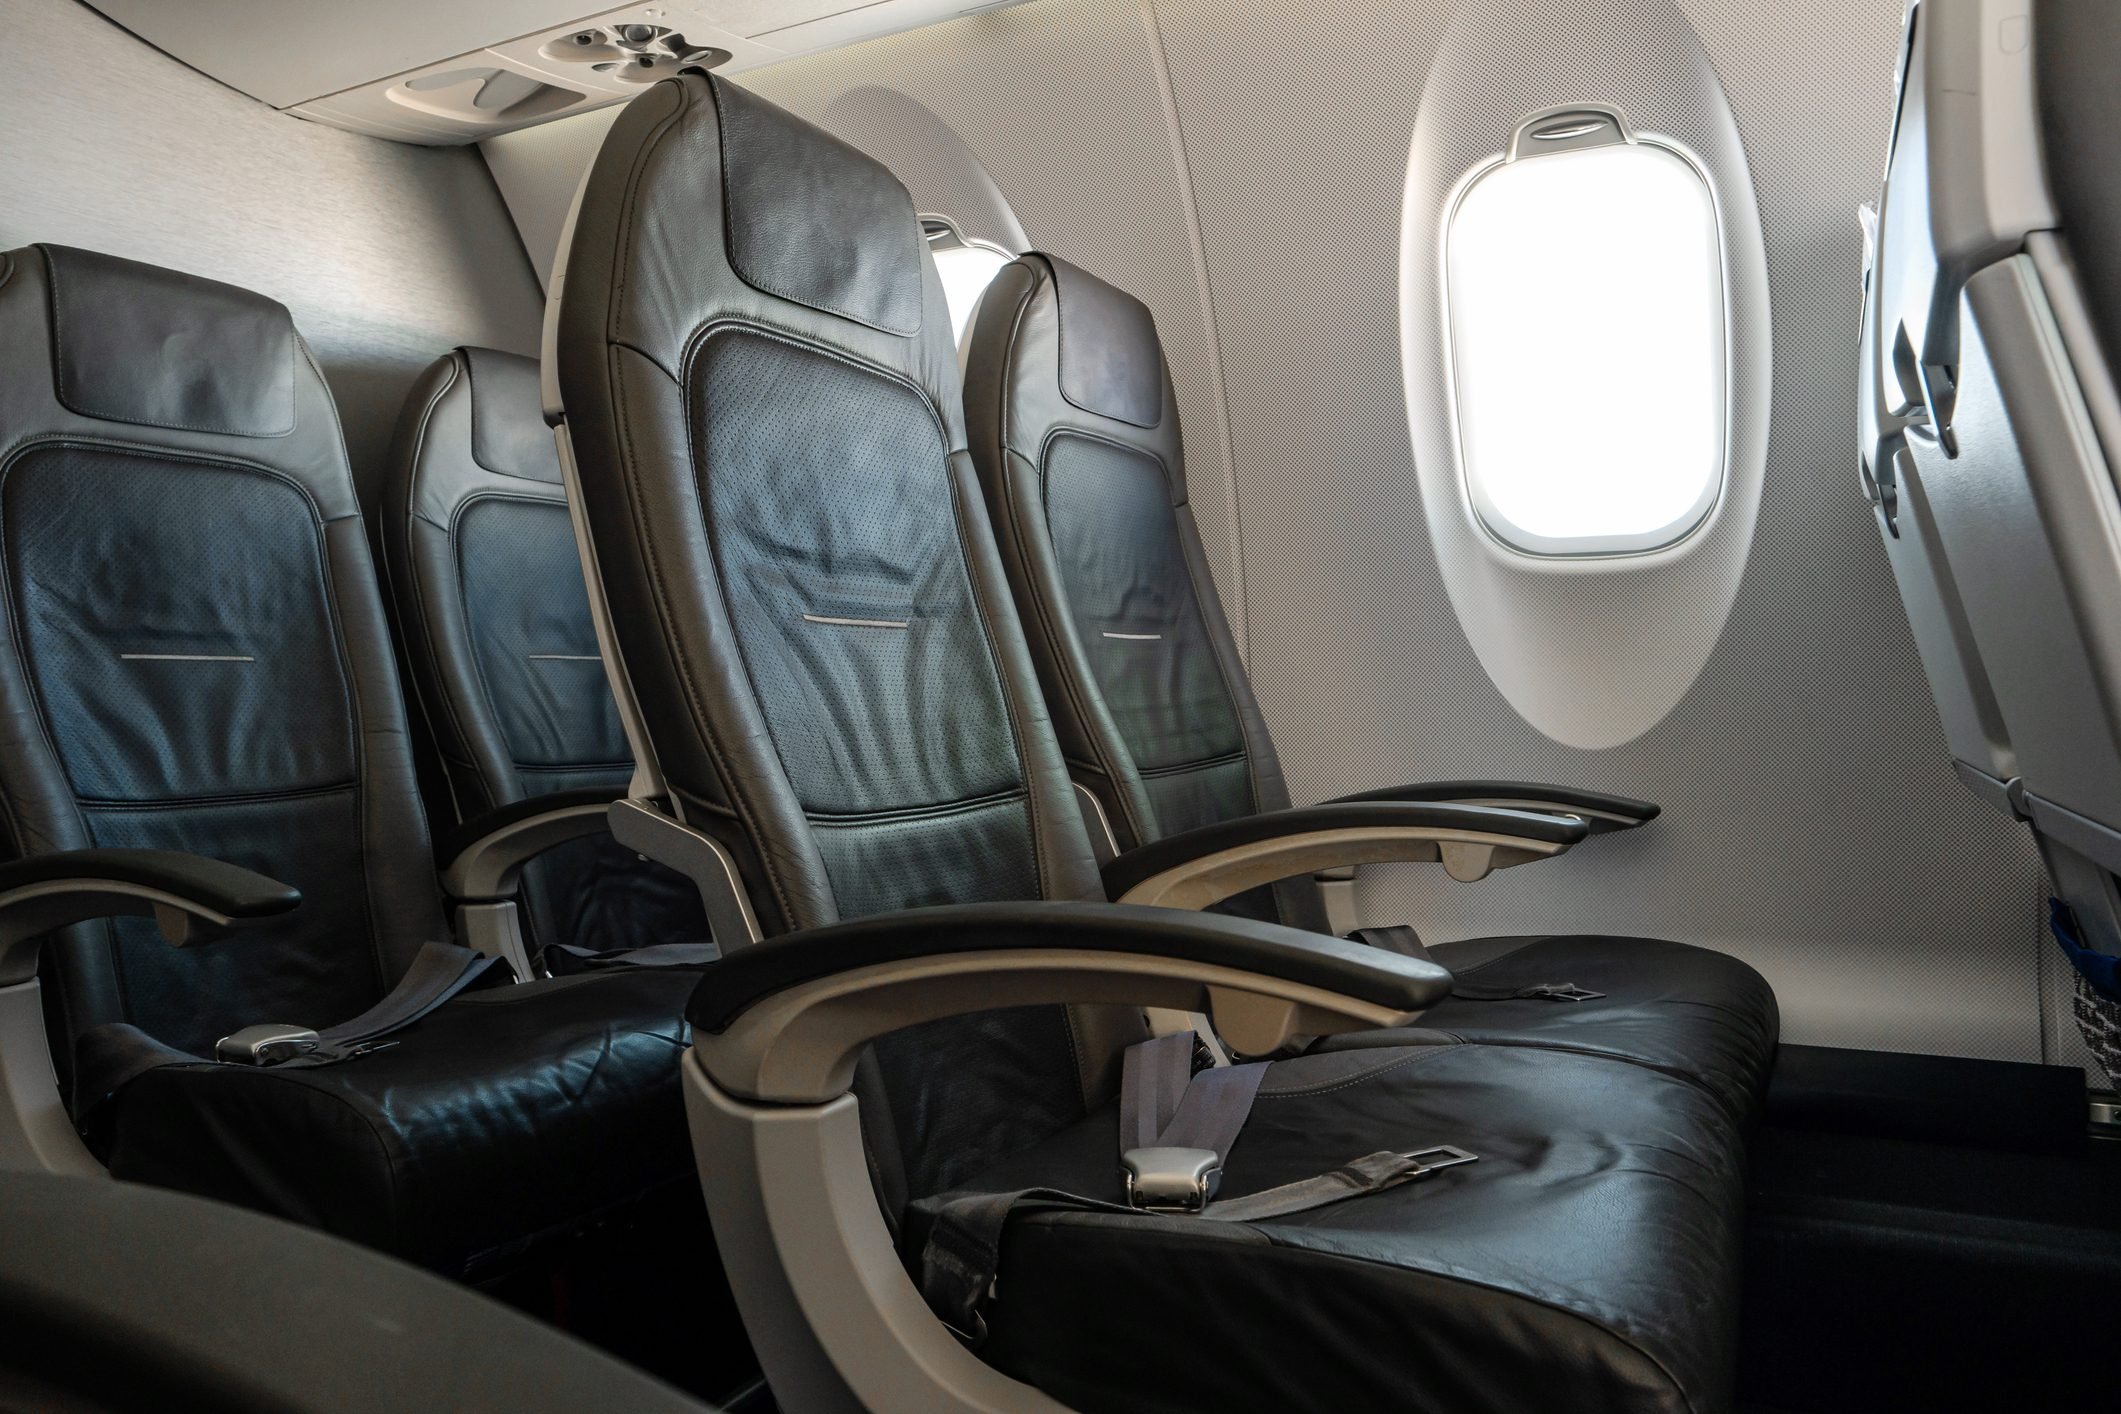 Secrets of Your Airline Seat